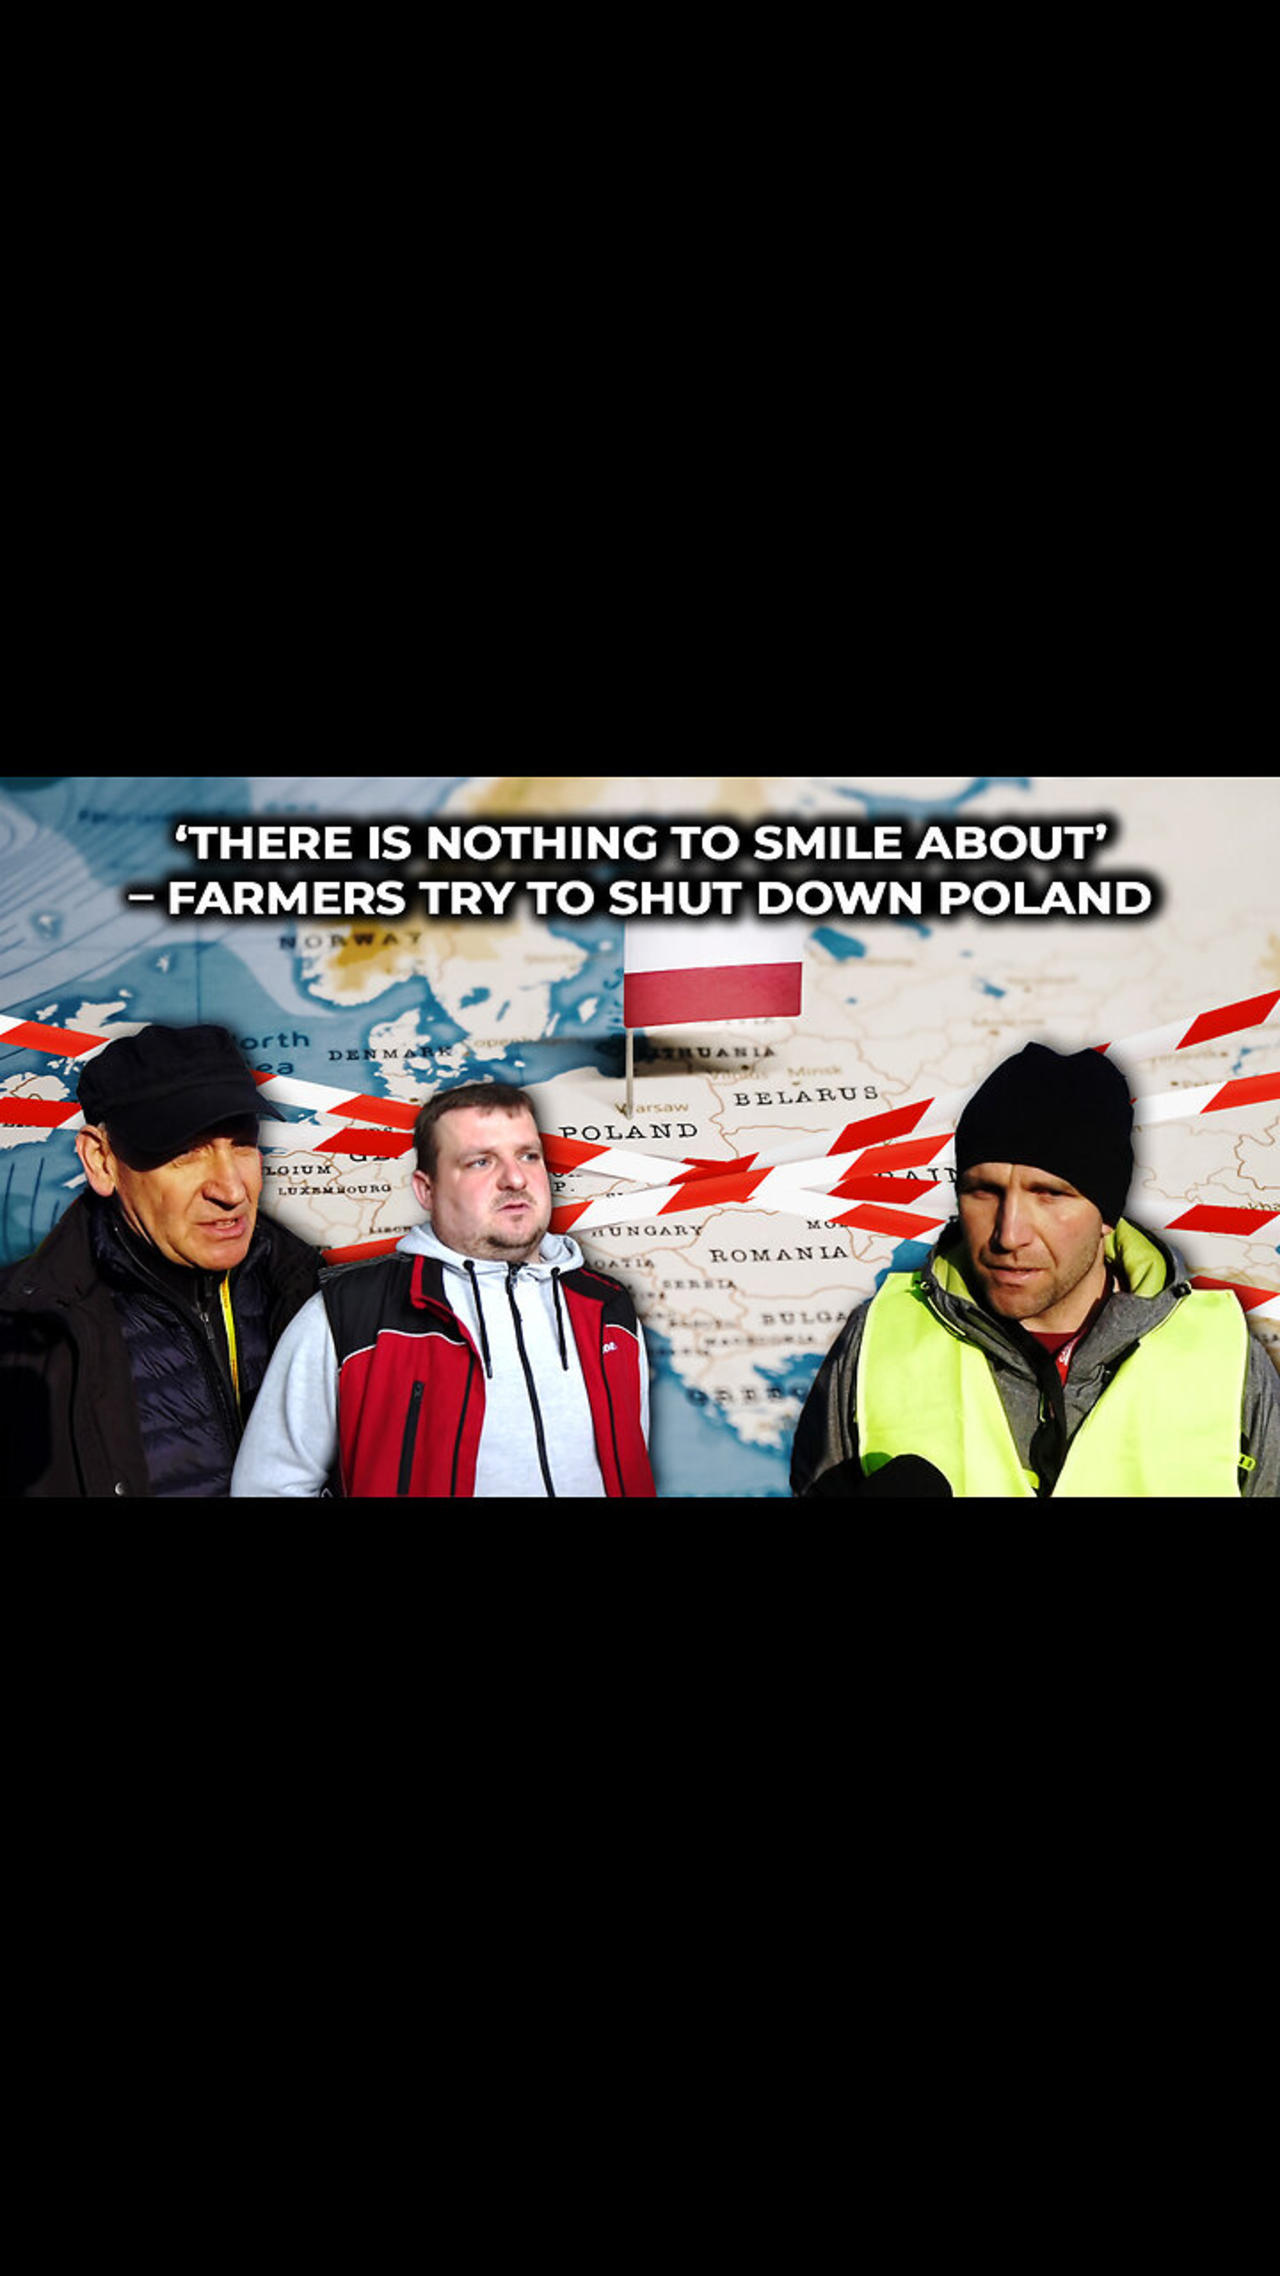 ‘There Is Nothing to Smile About’ – Farmers Try to Shut Down Poland